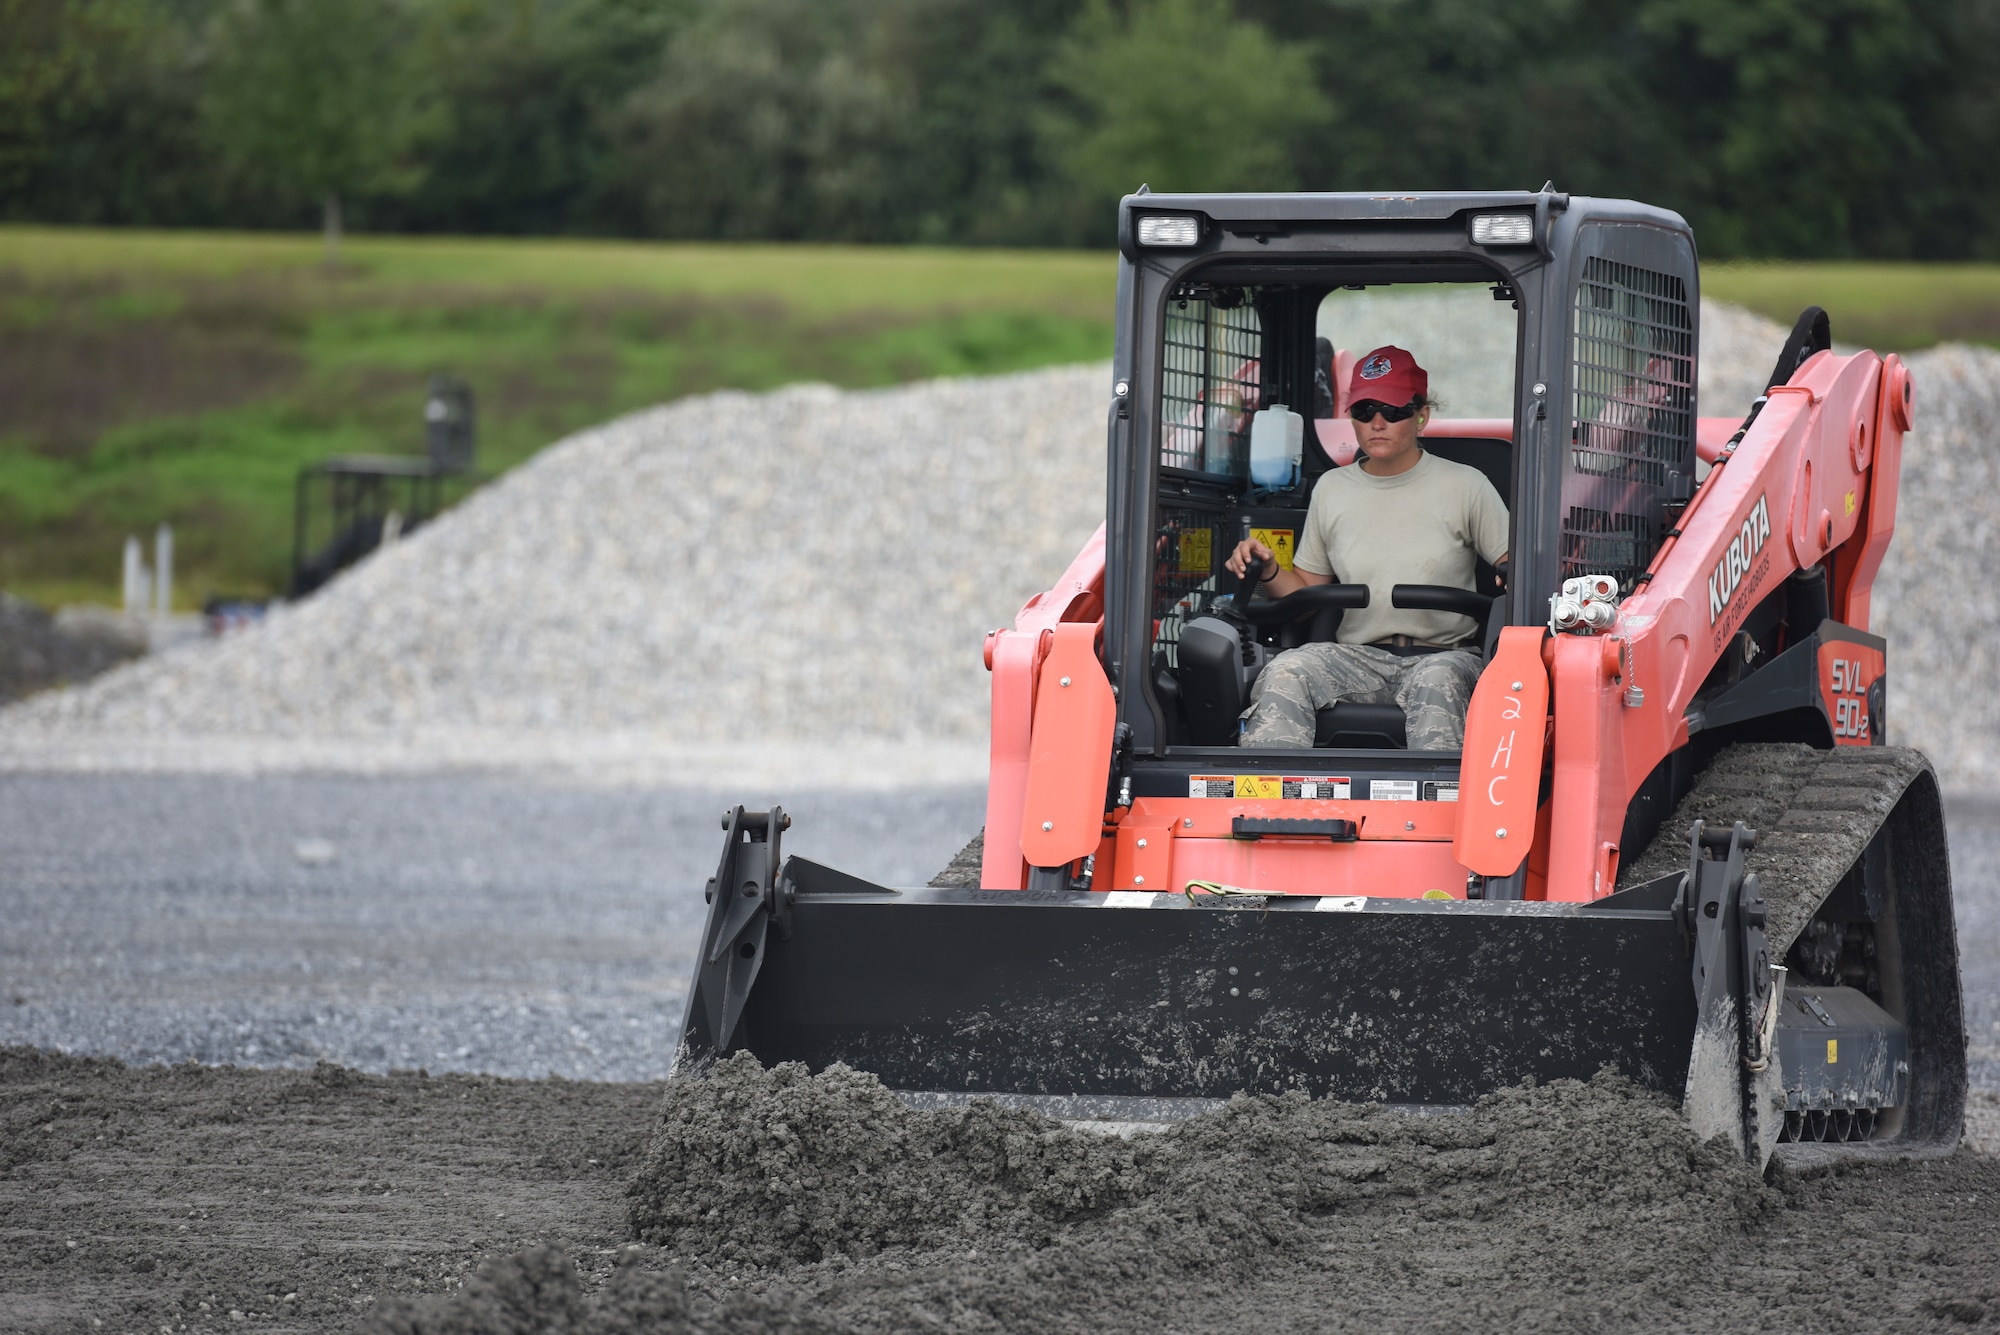 Senior Airman Helene Jones, a heavy equipment operator with the 201st RED HORSE Squadron, Fort Indiantown Gap, Pennsylvania, participates in a field training exercise Sept. 7, 2018. Jones was in charge of evenly distributing 1 1/2 feet of stone that was being laid as the foundation for a K-span building. (U.S. Air National Guard photo by Senior Airman Julia Sorber/Released)